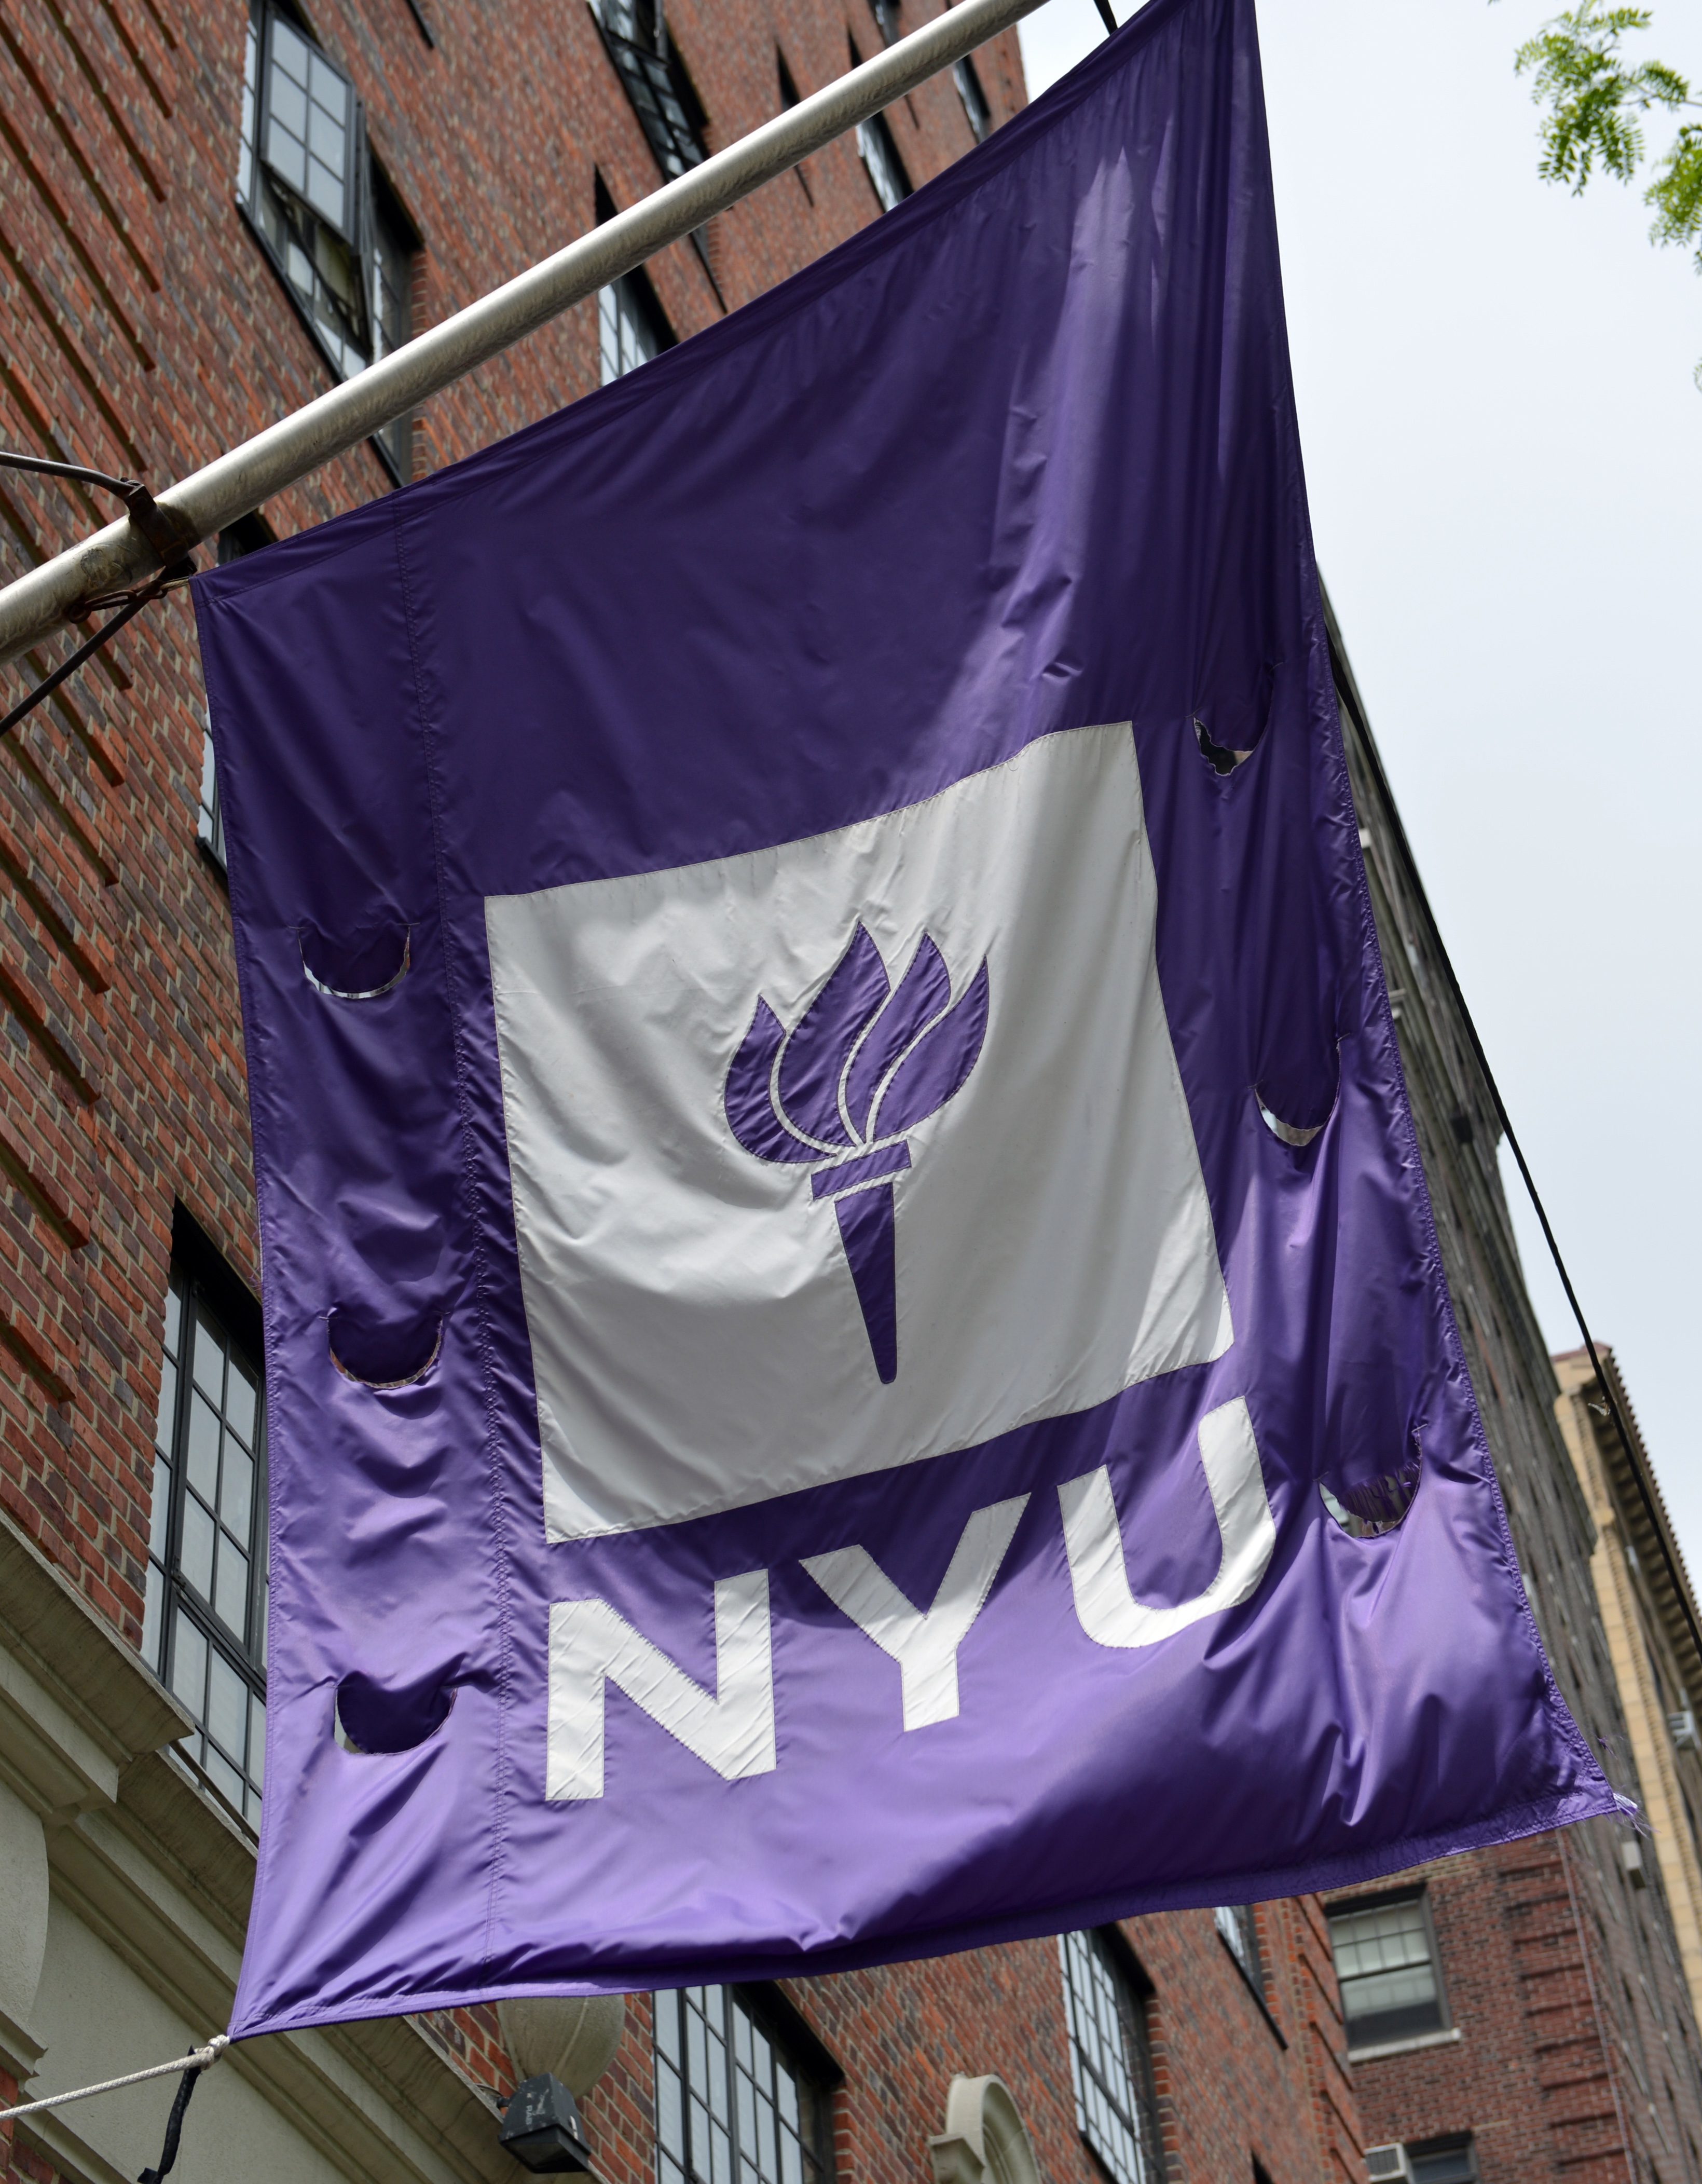 A flag flies from a building at New York